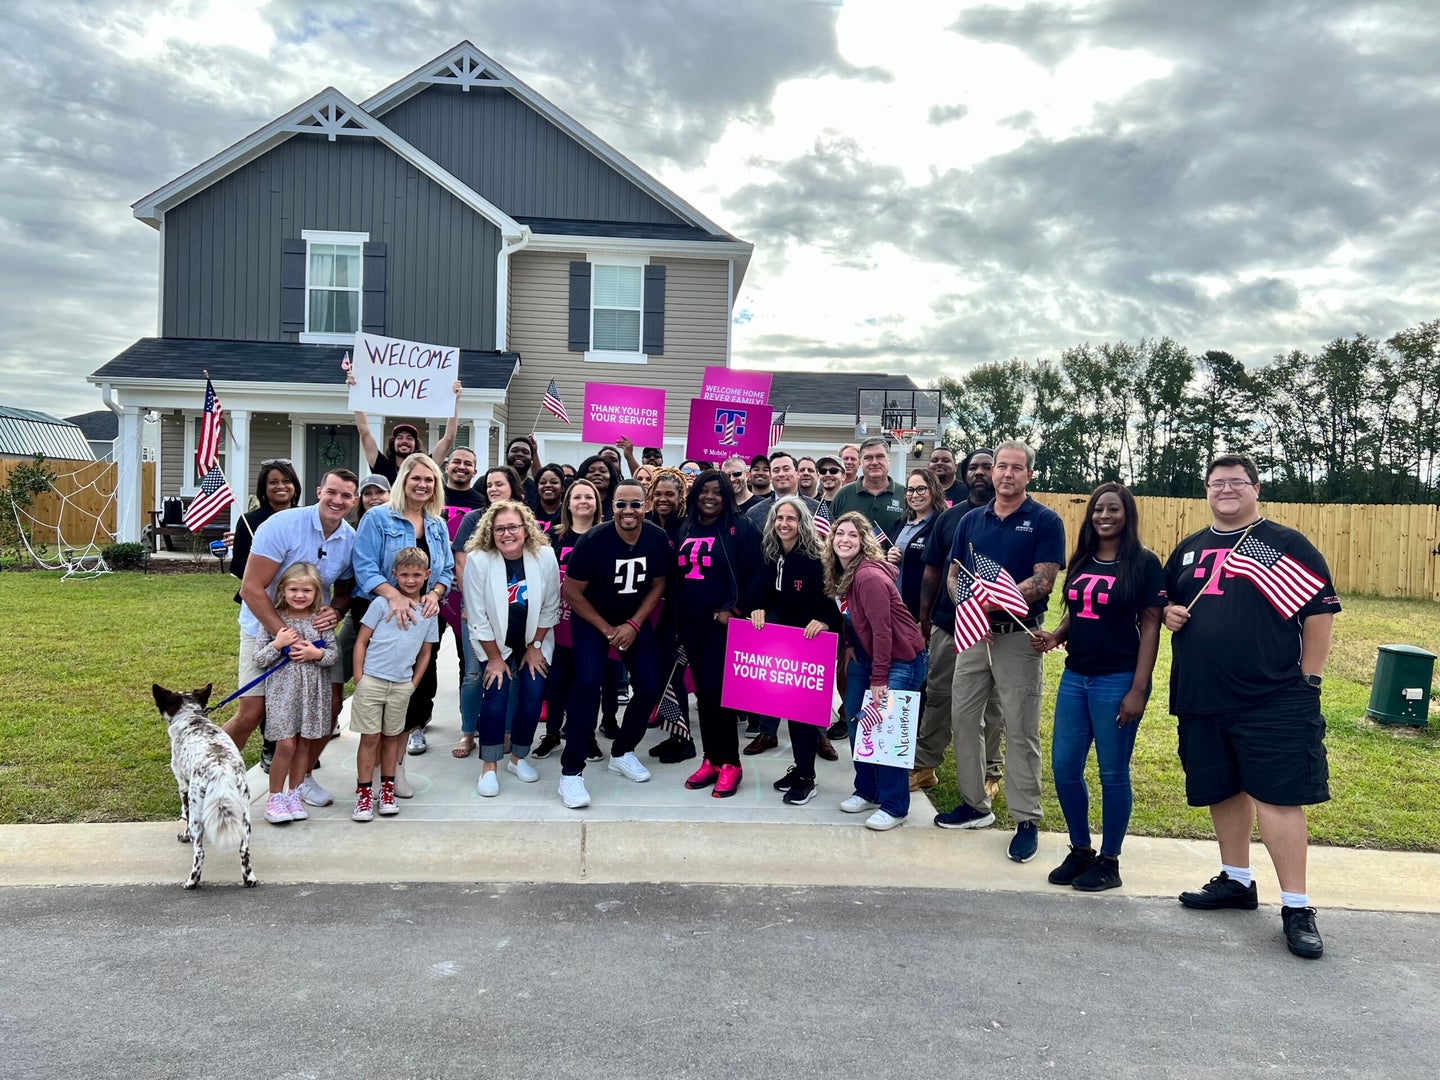 When it comes to support, T-Mobile doesn’t just talk the talk, they march the walk